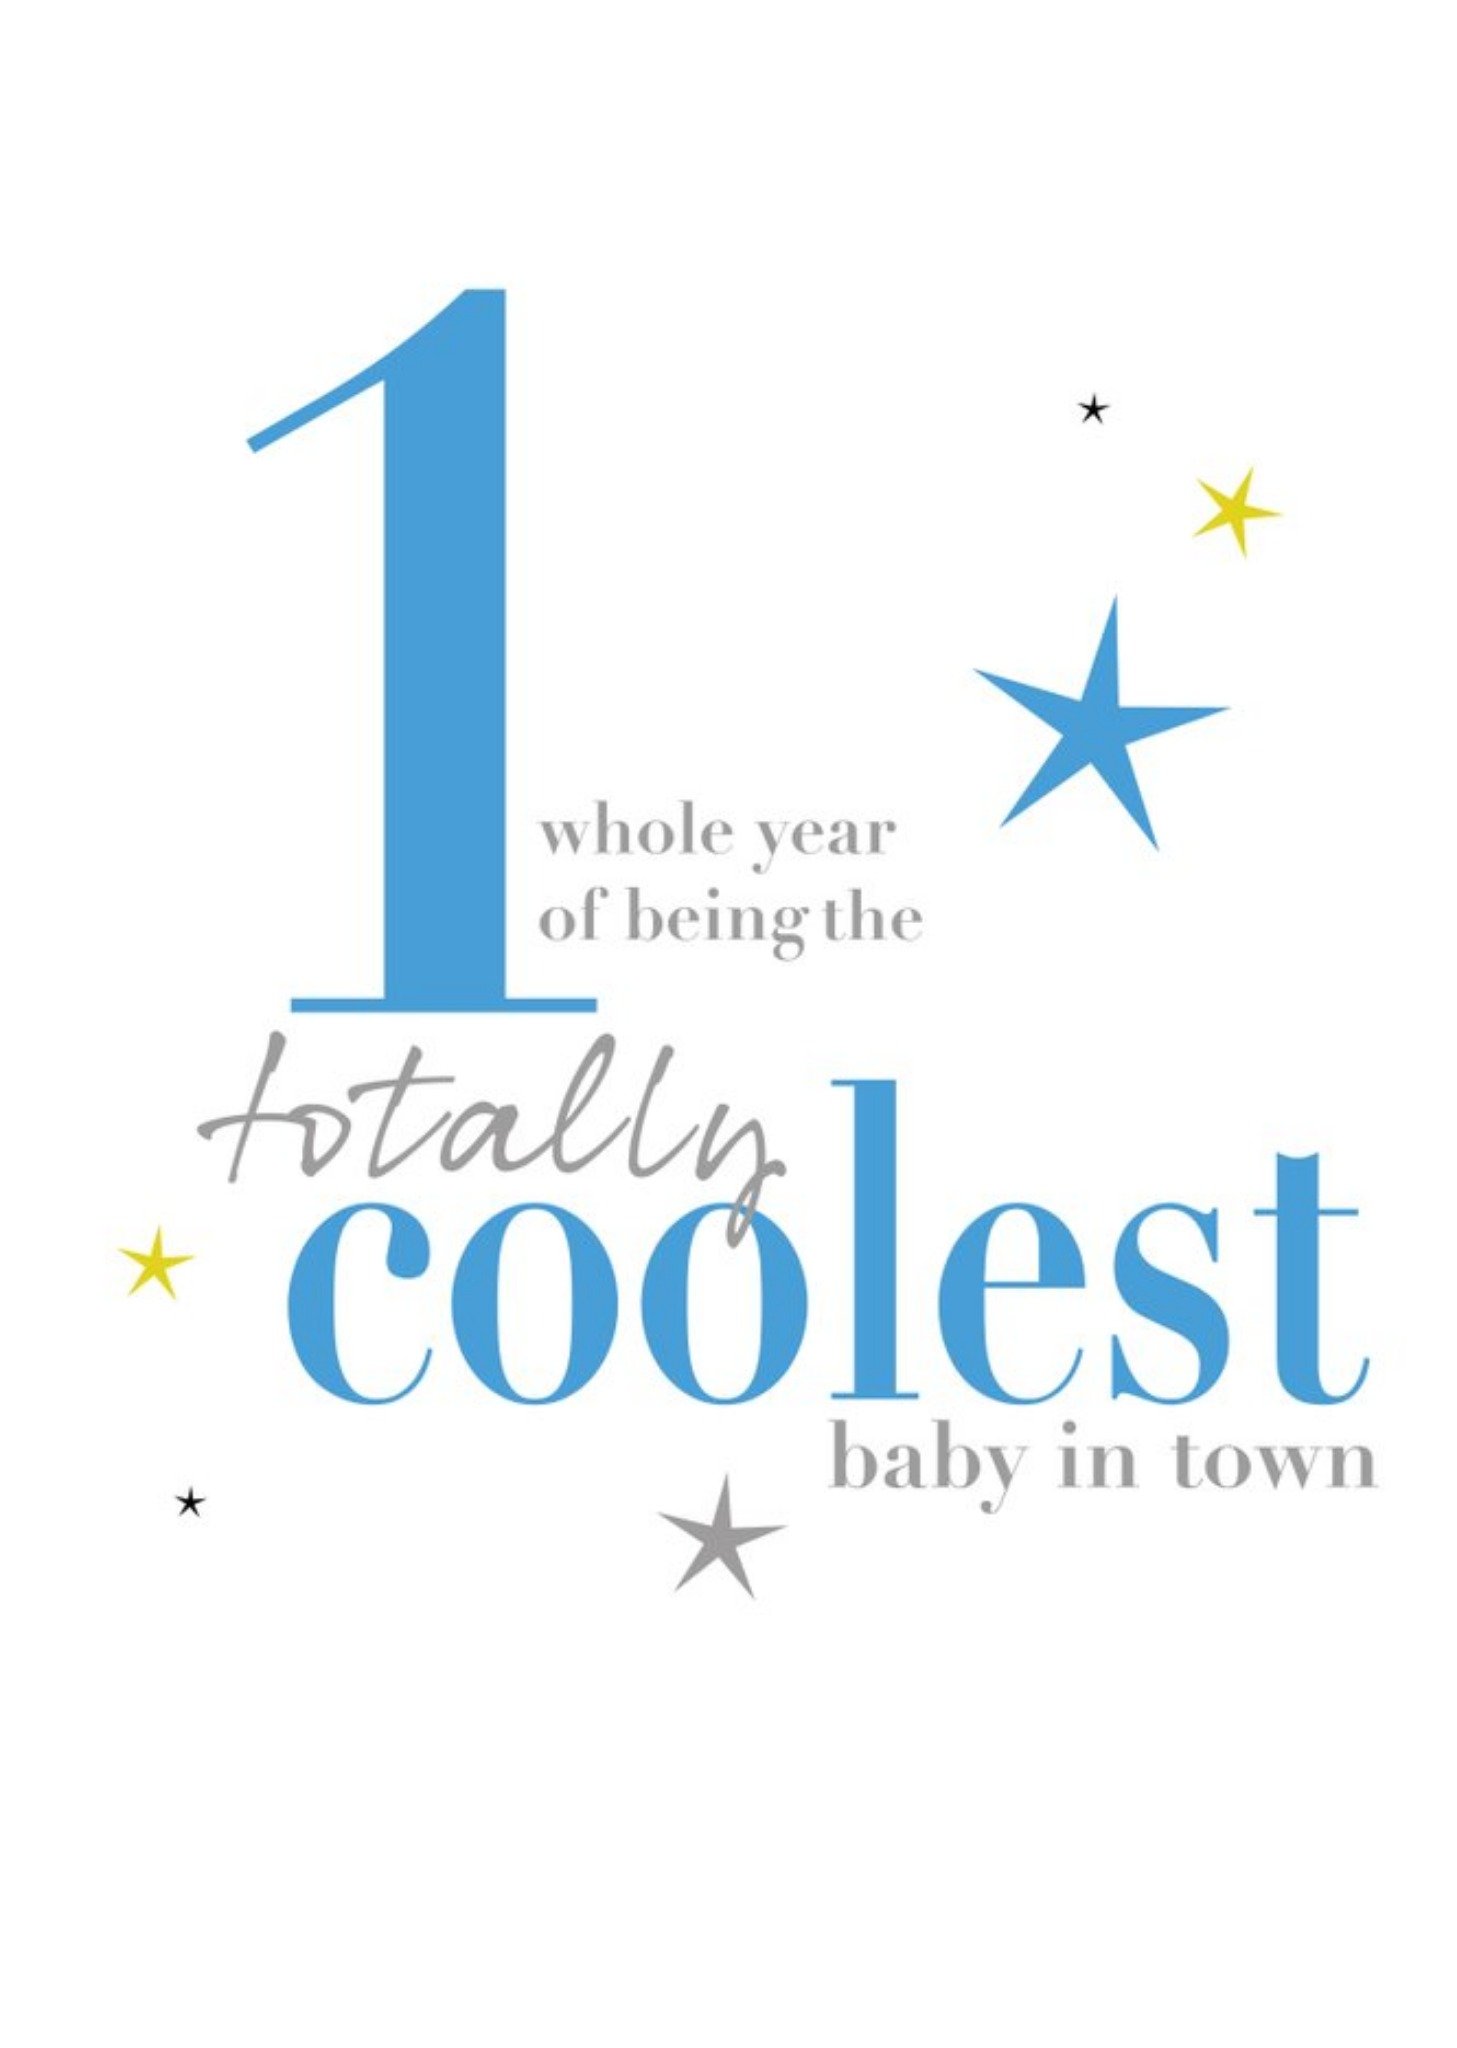 Moonpig Modern Typographic Design Age 1 Totally Coolest Baby In Town Card Ecard